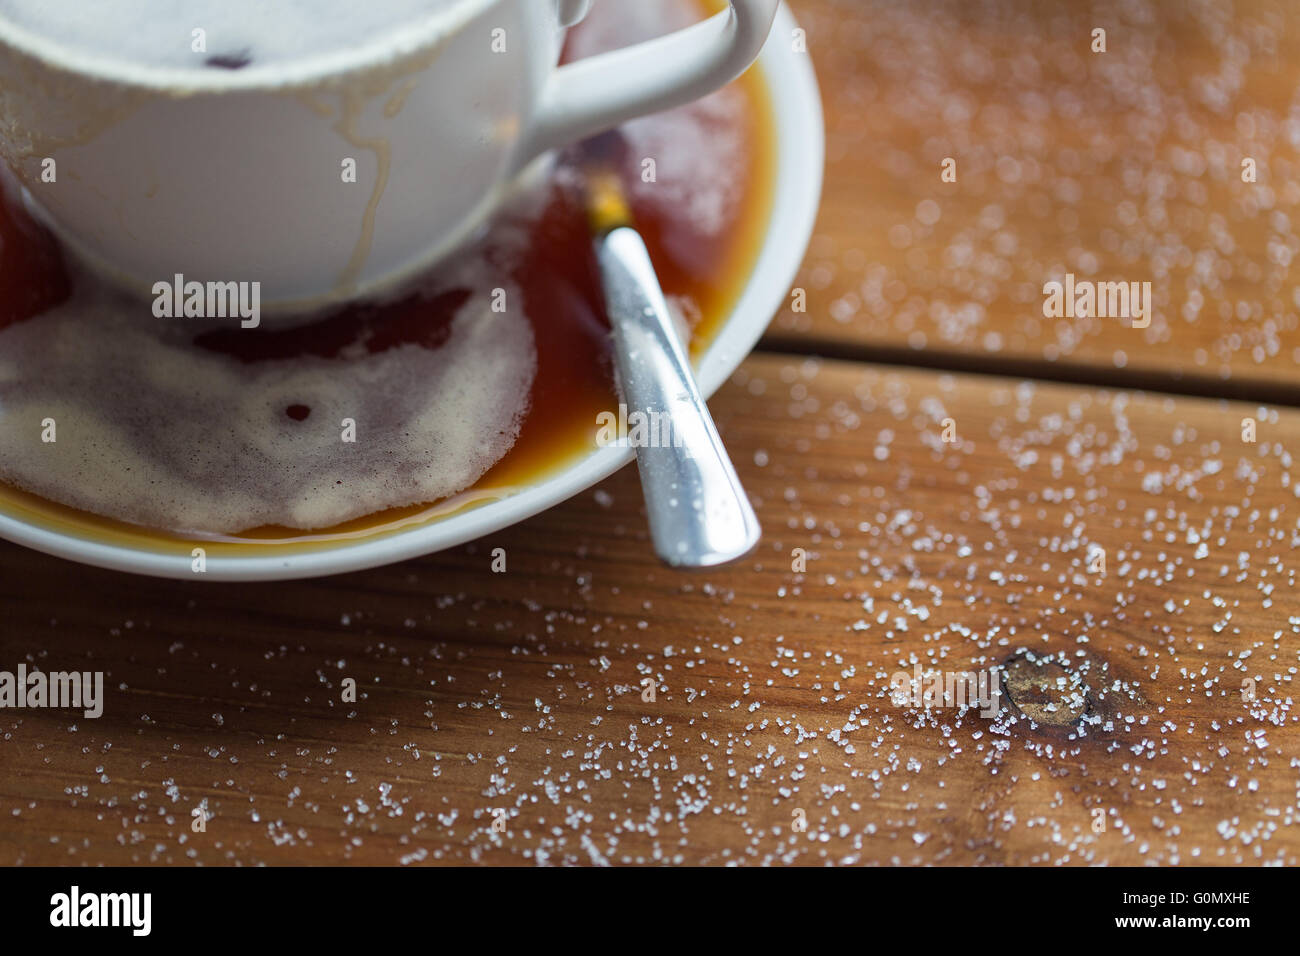 https://c8.alamy.com/comp/G0MXHE/close-up-coffee-cup-and-sugar-on-wooden-table-G0MXHE.jpg